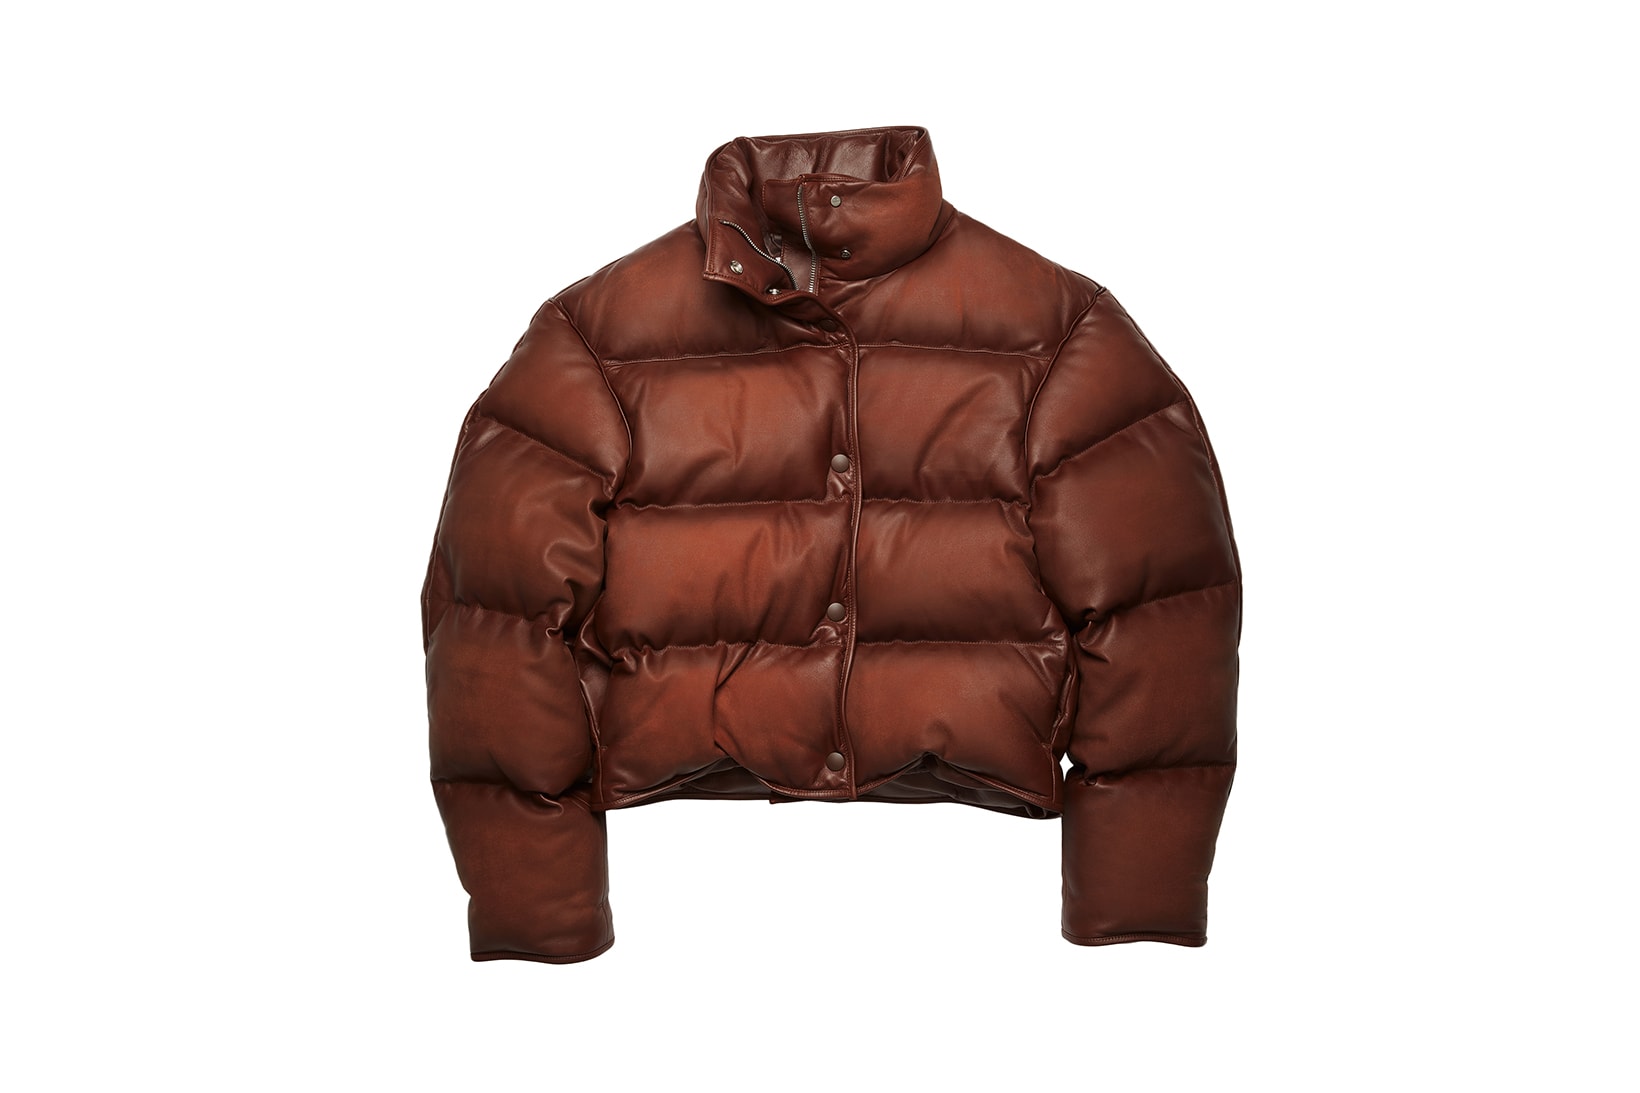 acne studios fall winter puffer jackets collection outerwear